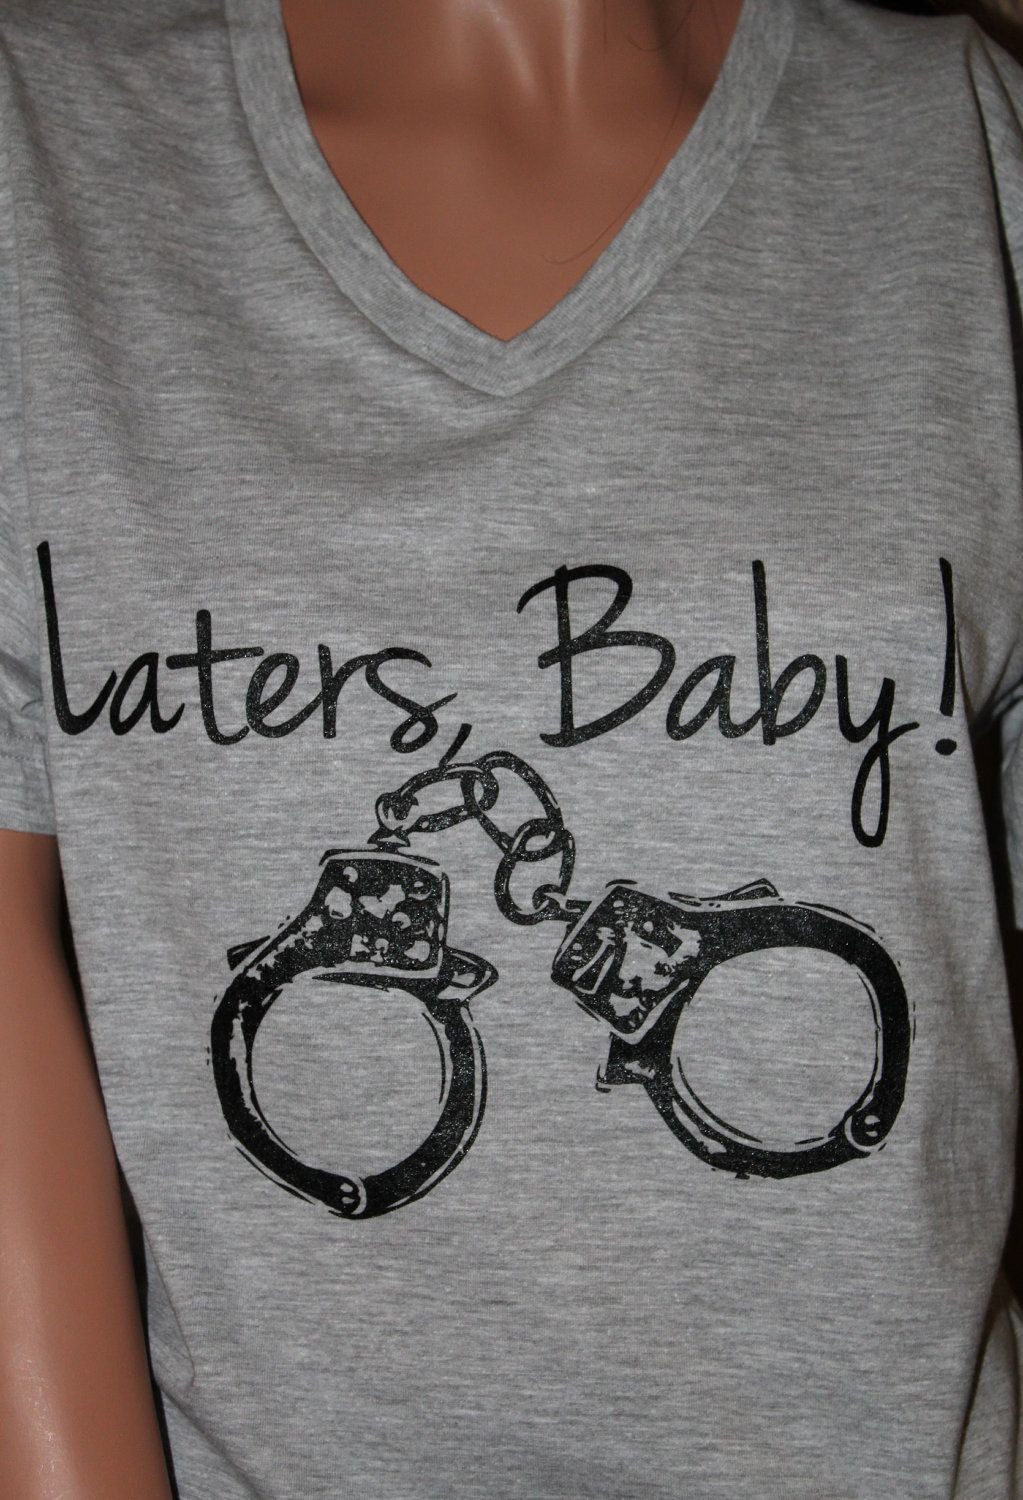 Laters Baby Quote
 Quote "Laters Baby" Inspired by Fifty Shades of Grey